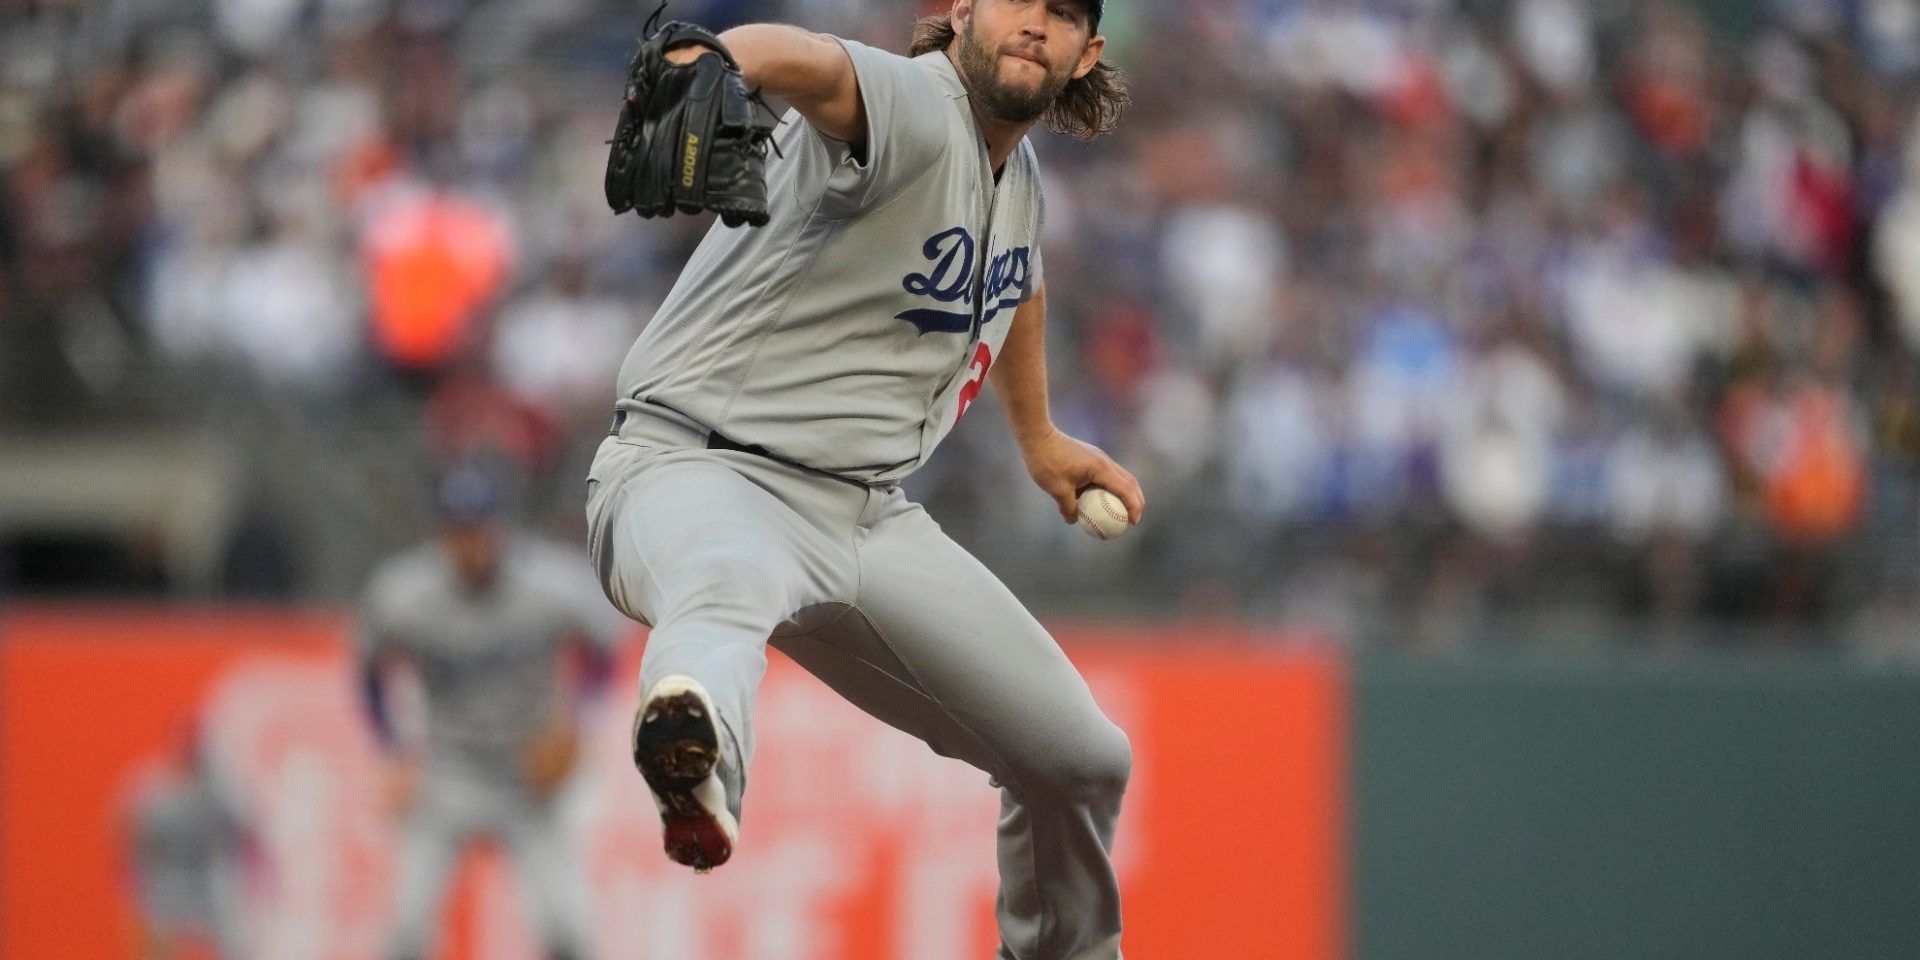 Los Angeles Dodgers' Clayton Kershaw during a baseball game against the San Francisco Giants in San Francisco, Saturday, Sept. 30, 2023. (AP Photo/Jeff Chiu)